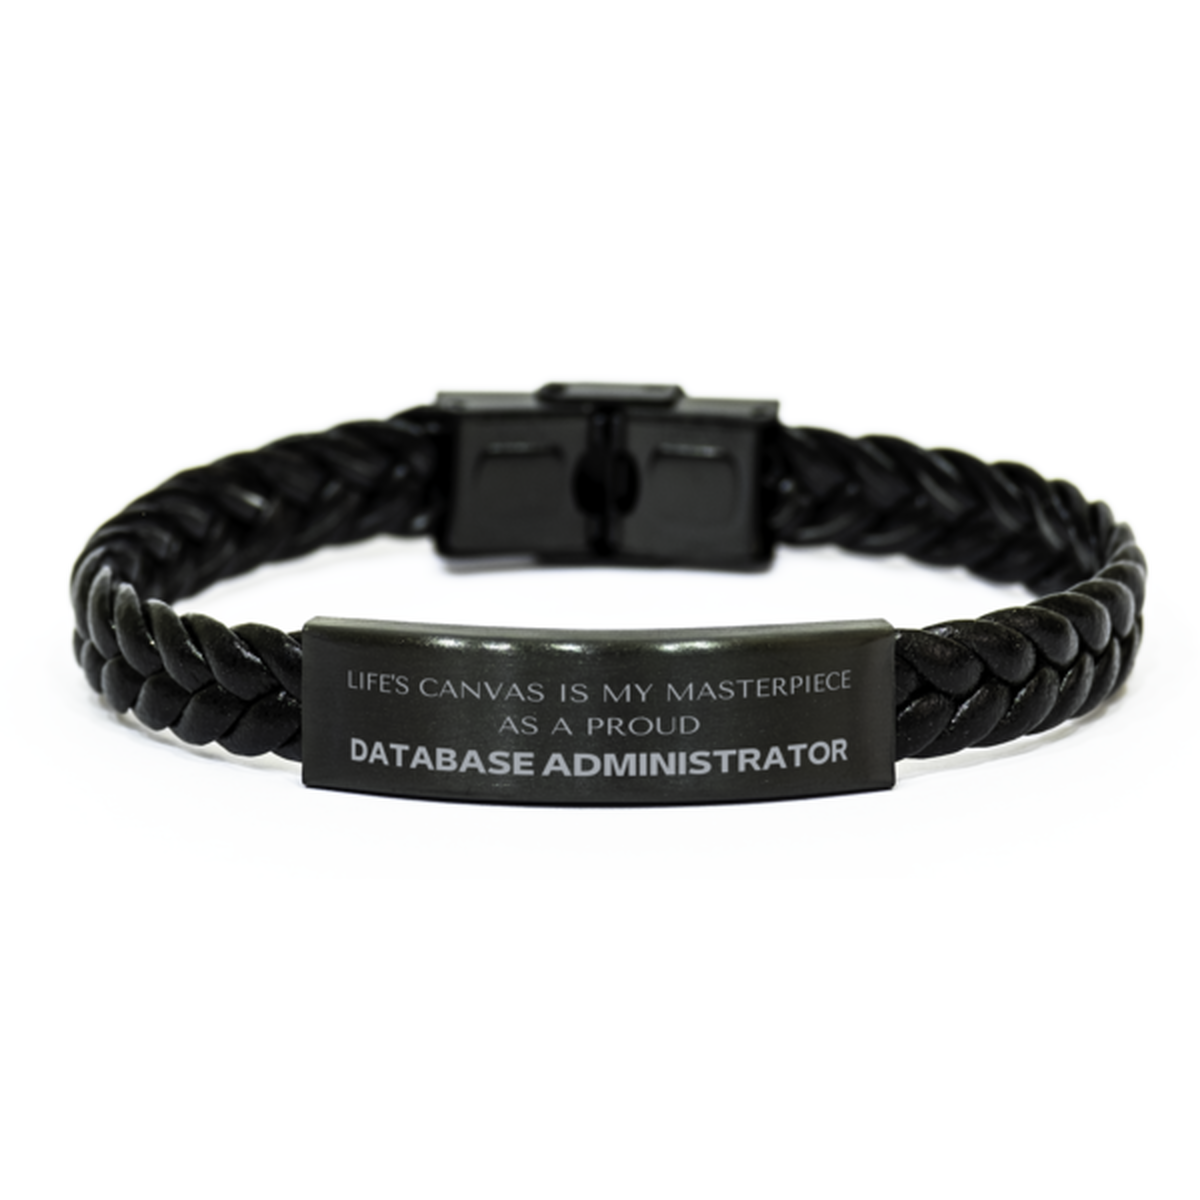 Proud Database Administrator Gifts, Life's canvas is my masterpiece, Epic Birthday Christmas Unique Braided Leather Bracelet For Database Administrator, Coworkers, Men, Women, Friends